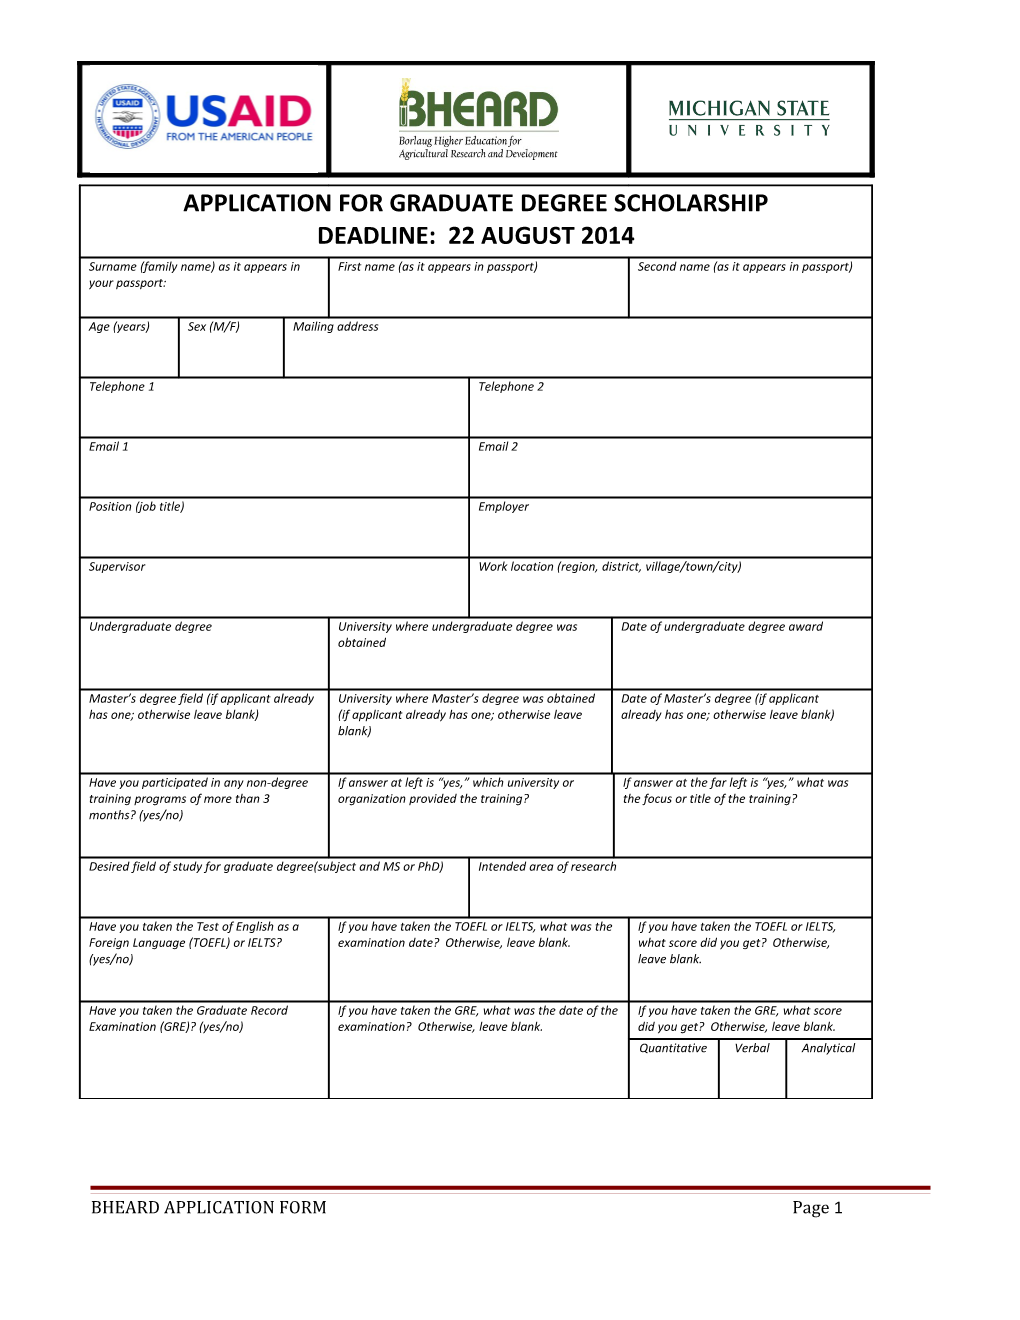 Checklist for Submitting Applications